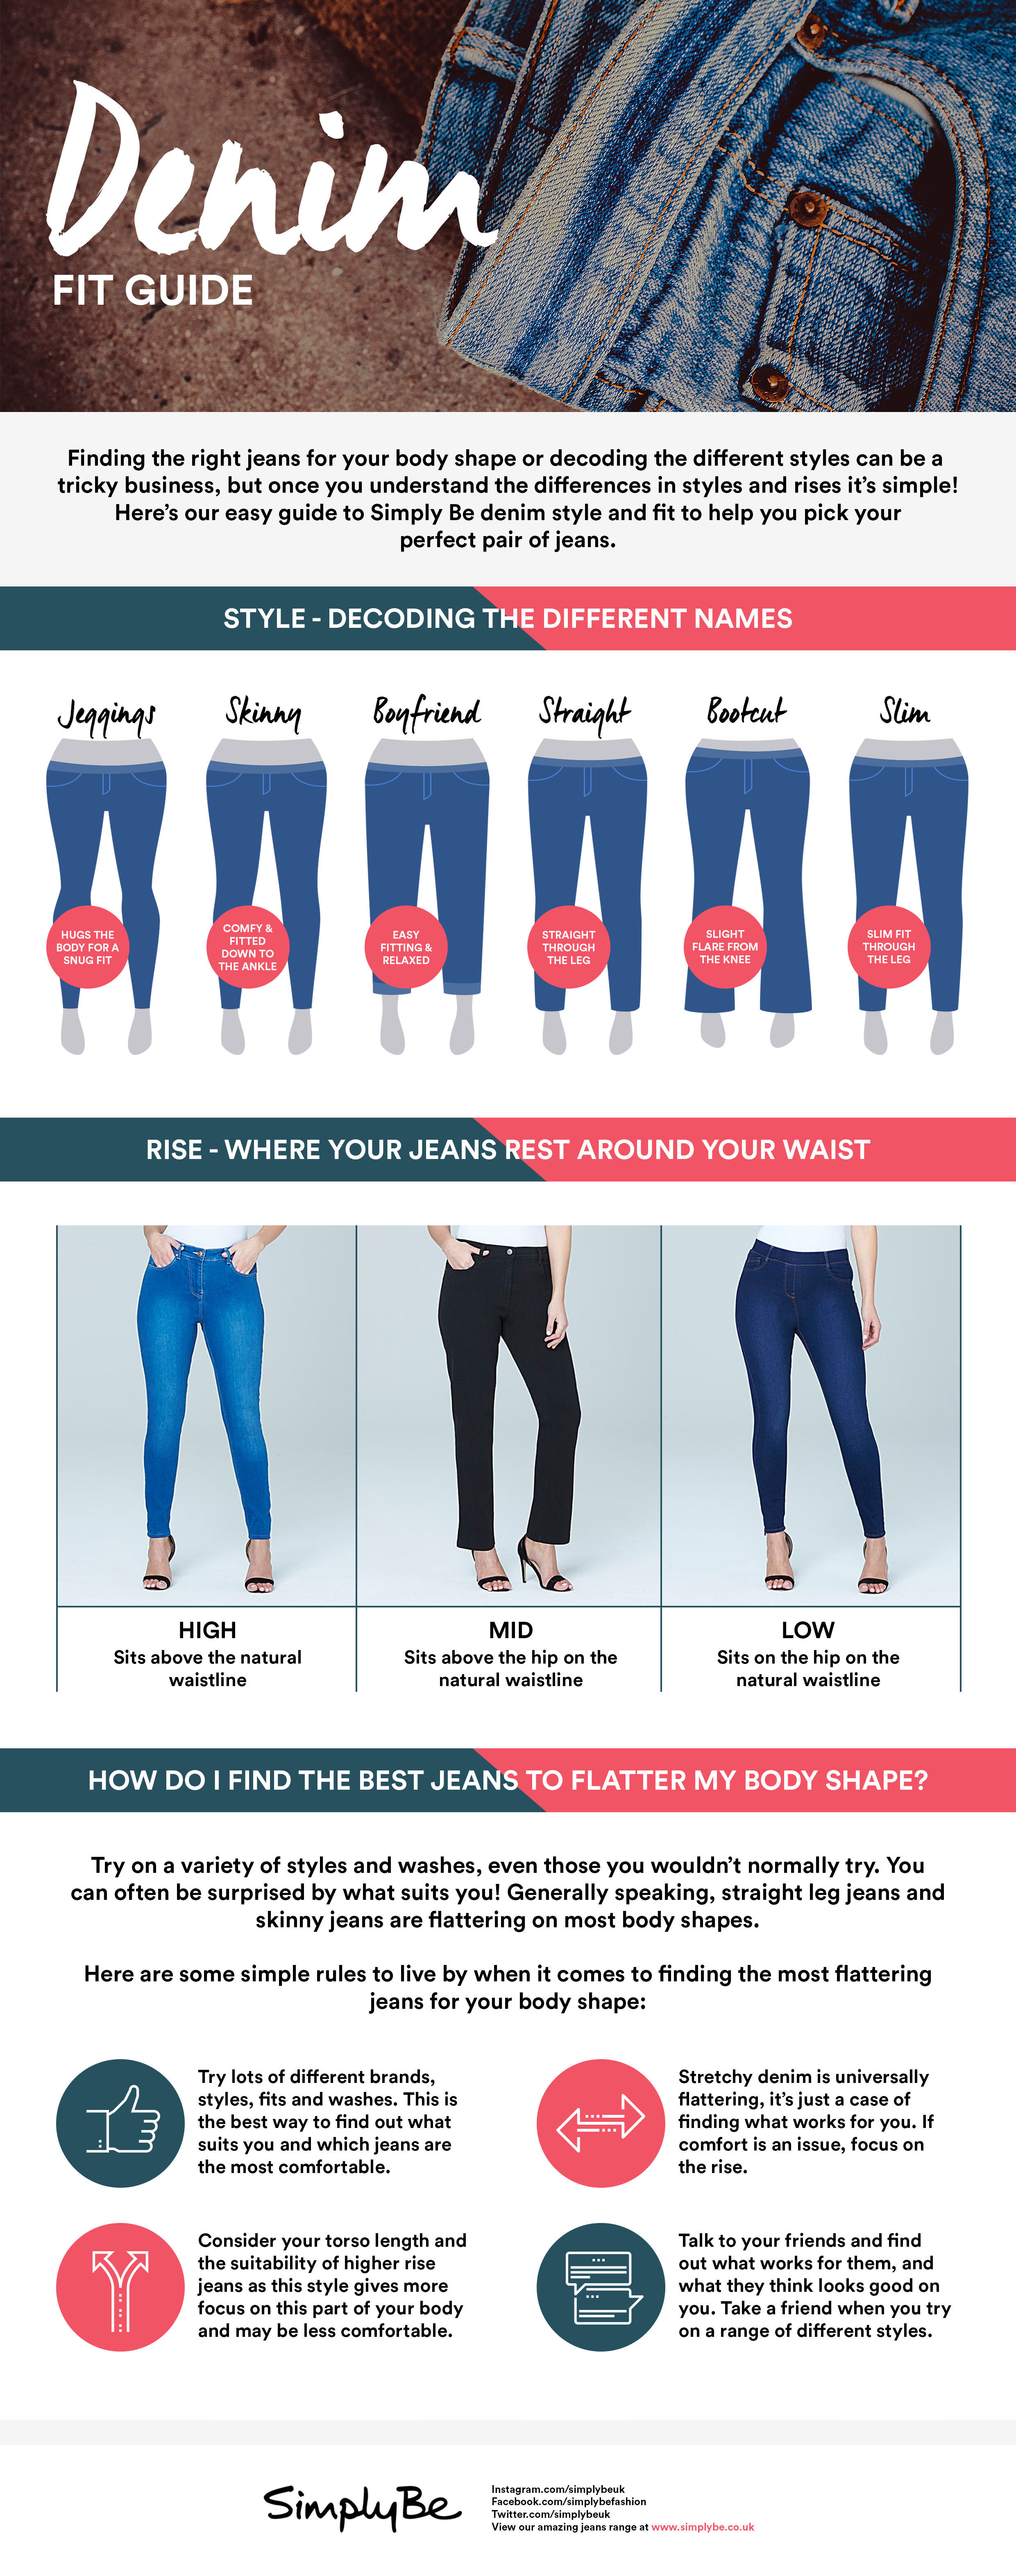 How To Find The Right Jeans For Your Body Type (Best Guide)